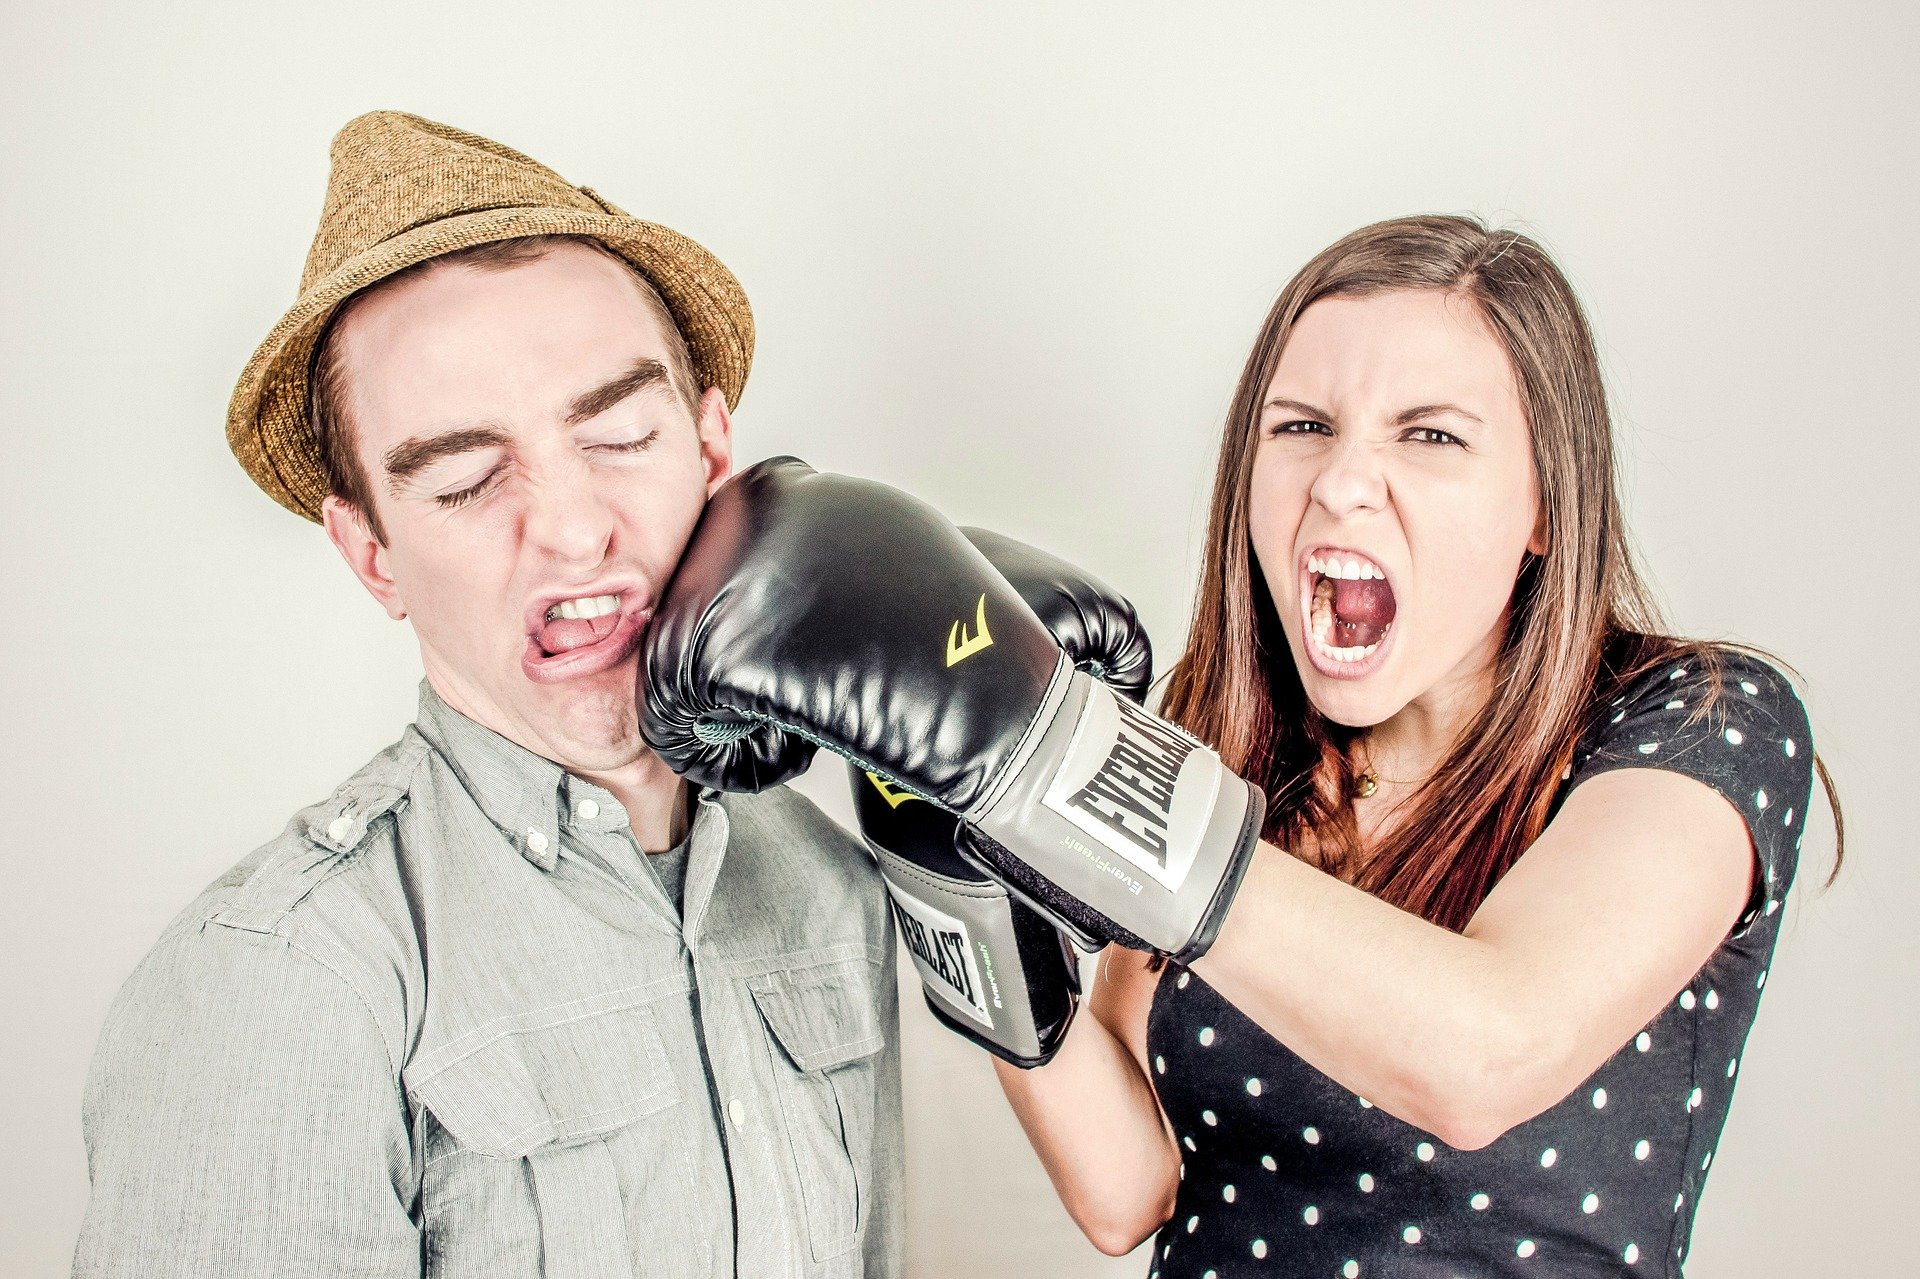 Team collaboration - Picture of woman boxing with man